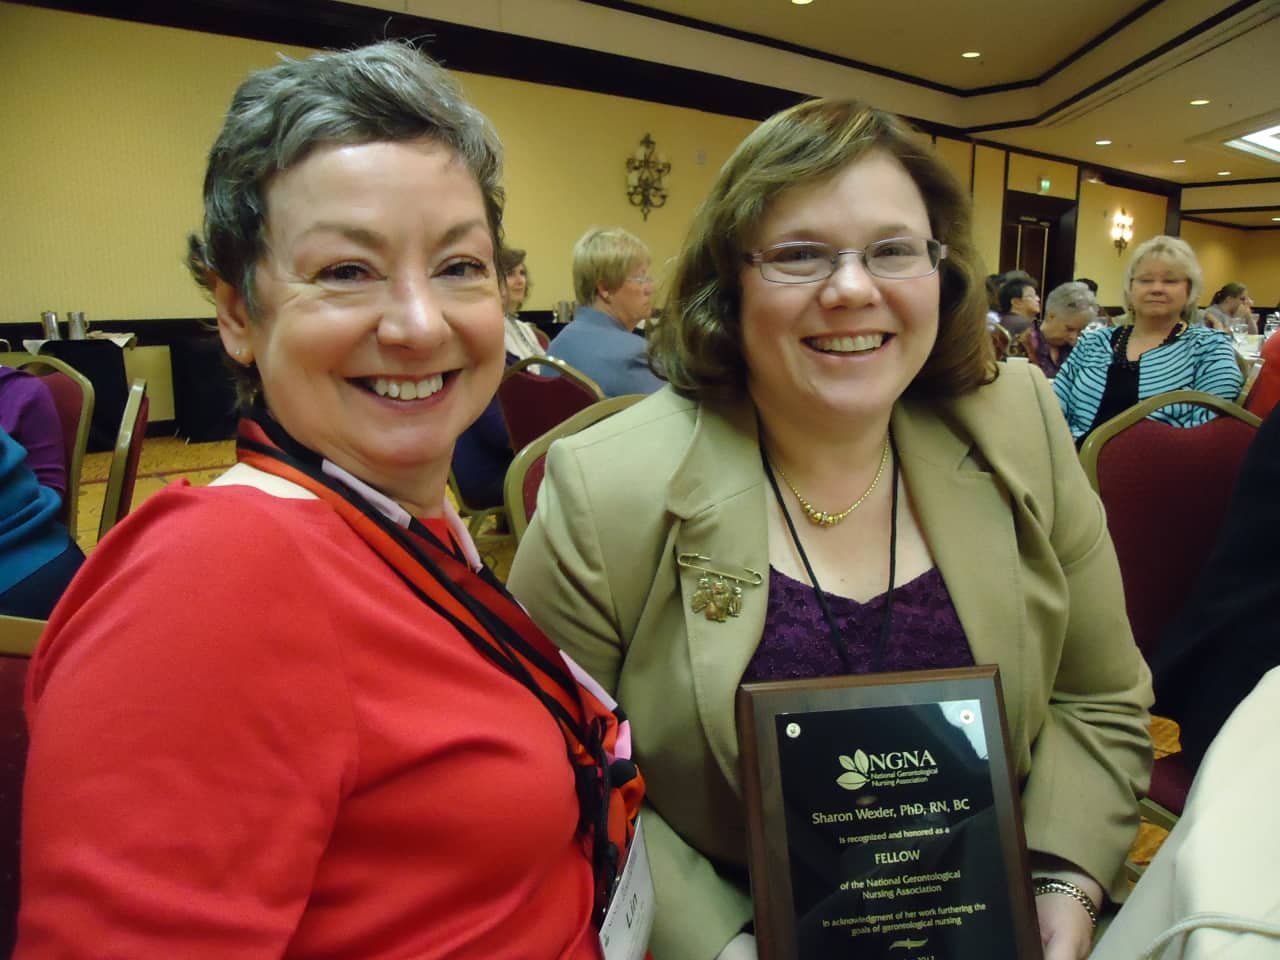 Left to Right: Pace's Dr. Lin Drury and Dr. Sharon Wexler.